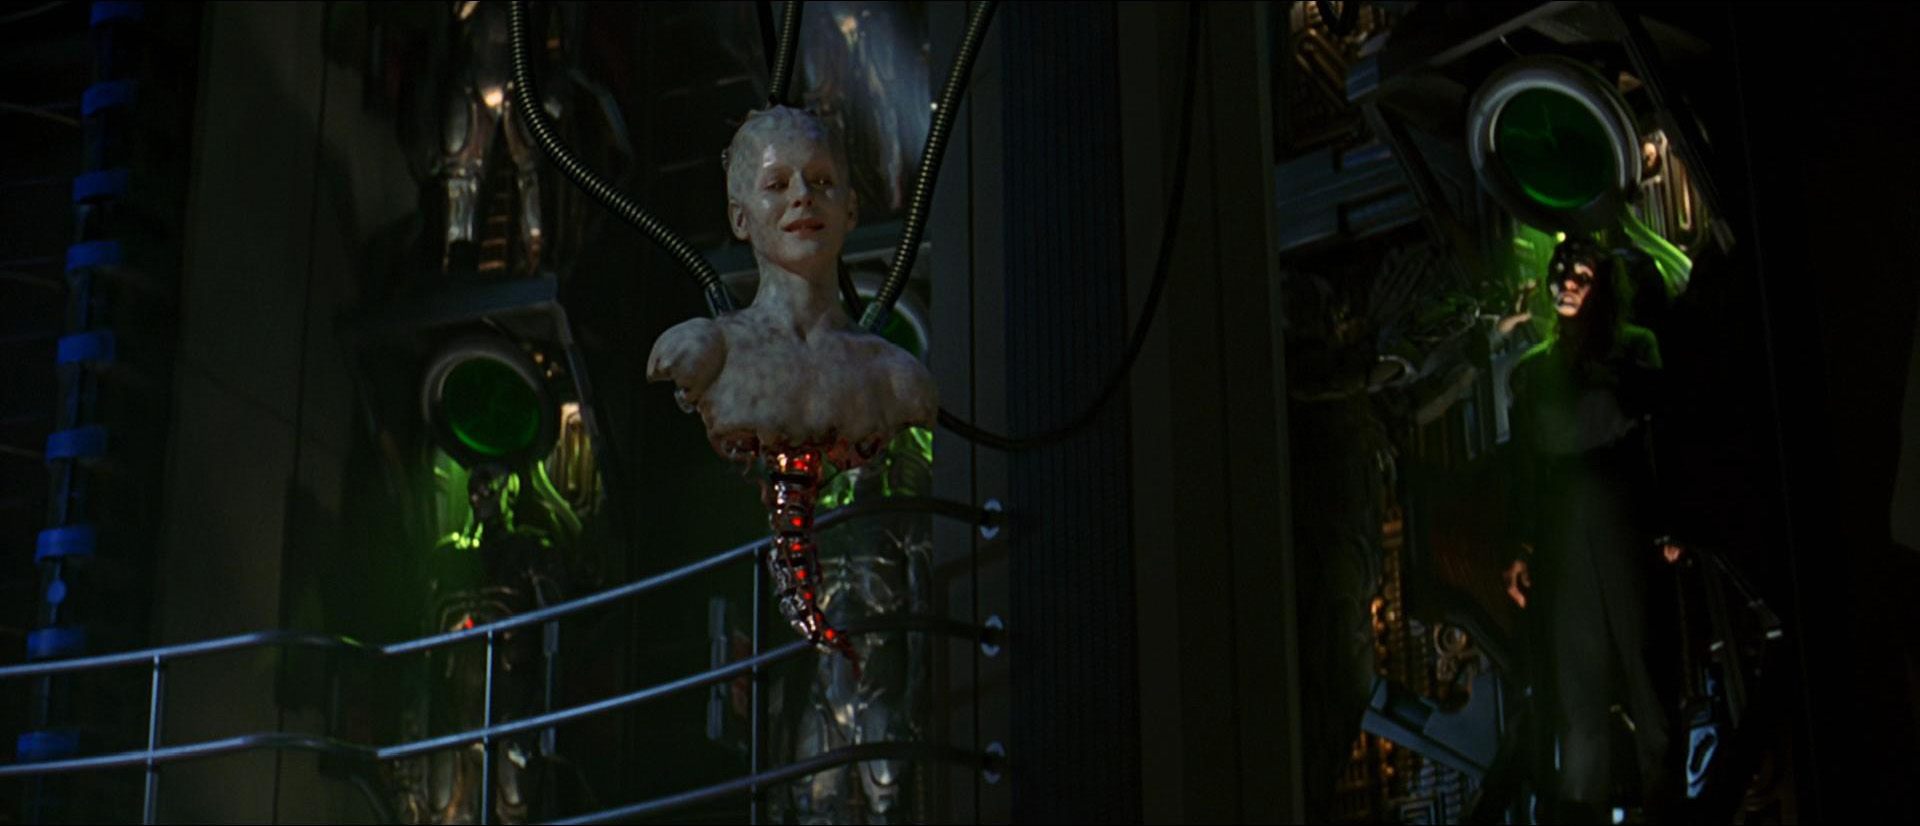 First Contact even introduced The Borg Queen played by Alice Krige Star Trek First Contact